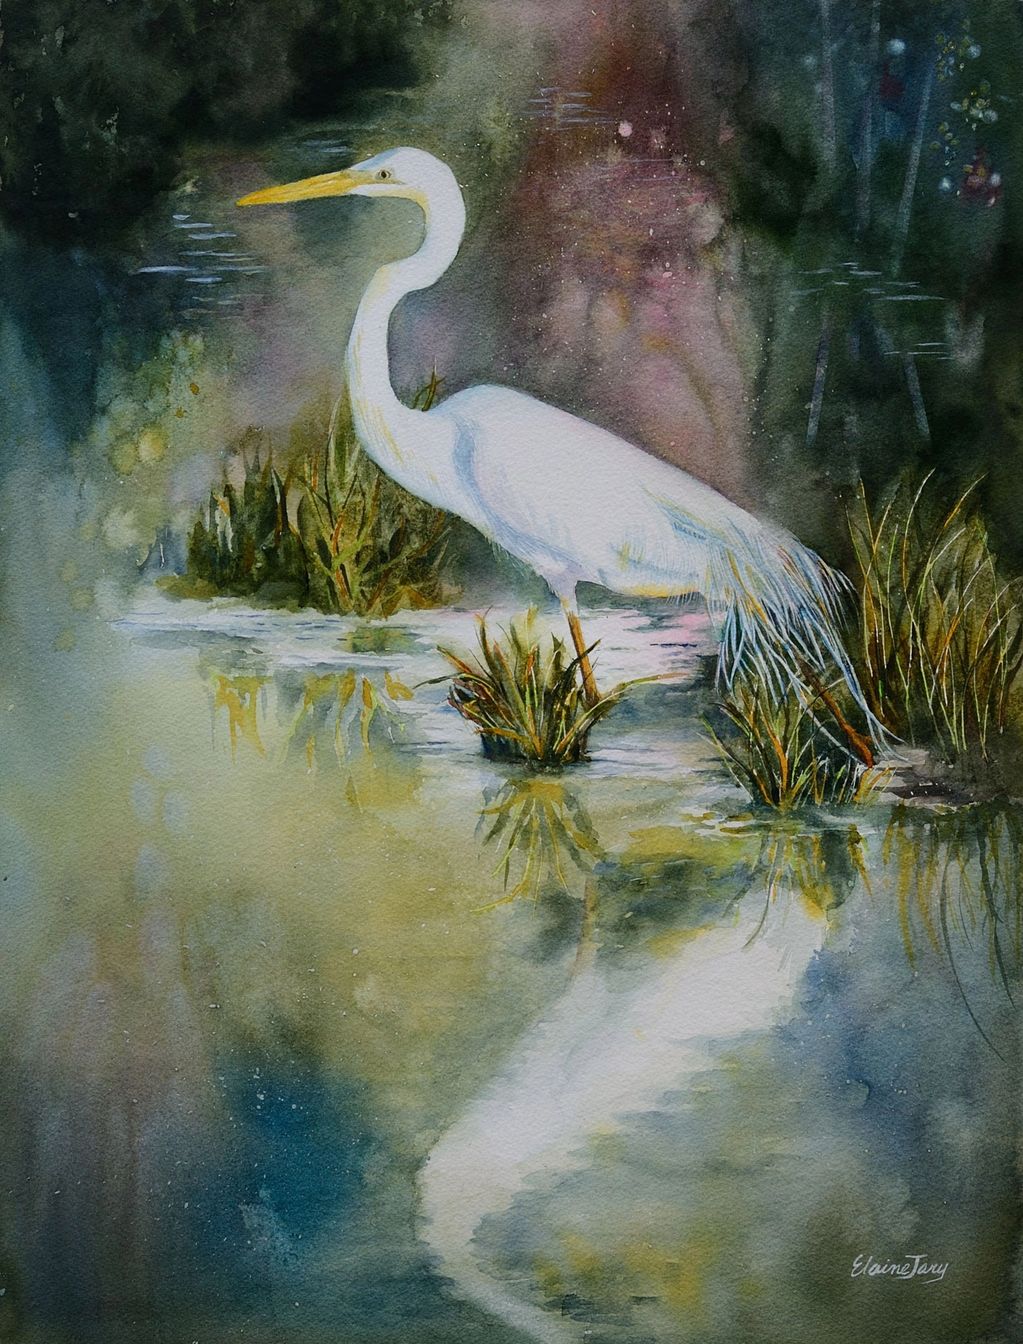 Egret's  Domain by Elaine Jary